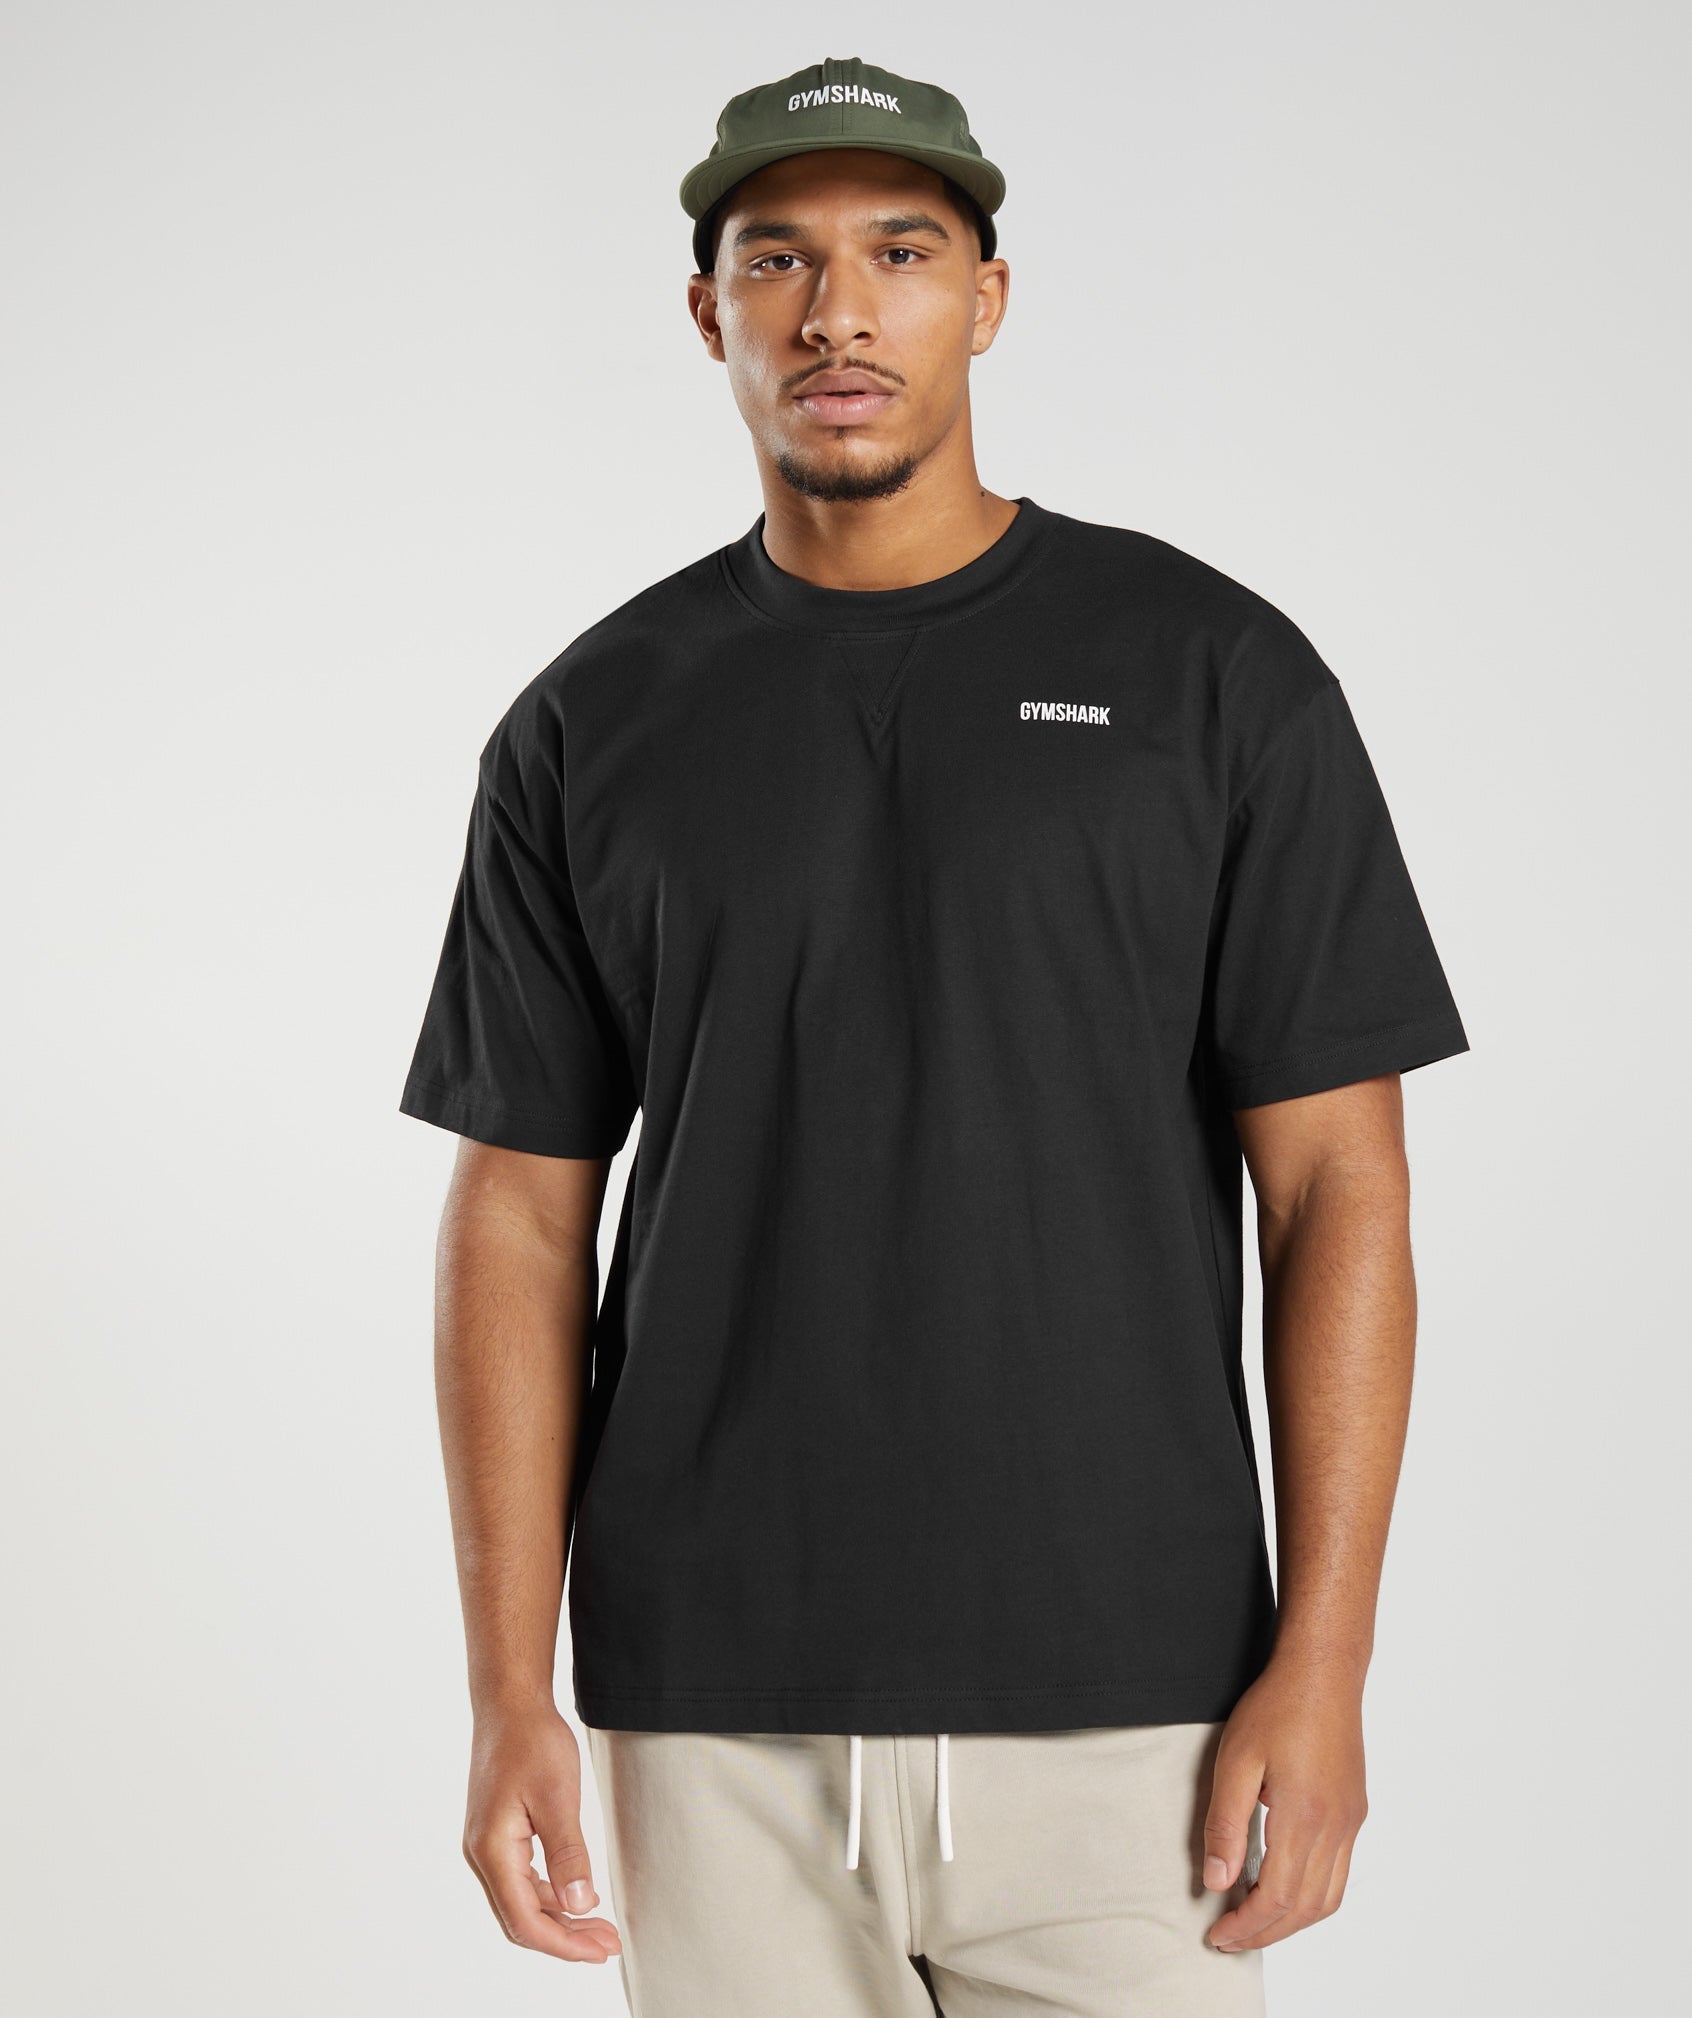 Rest Day Sweats T-Shirt in Black - view 2